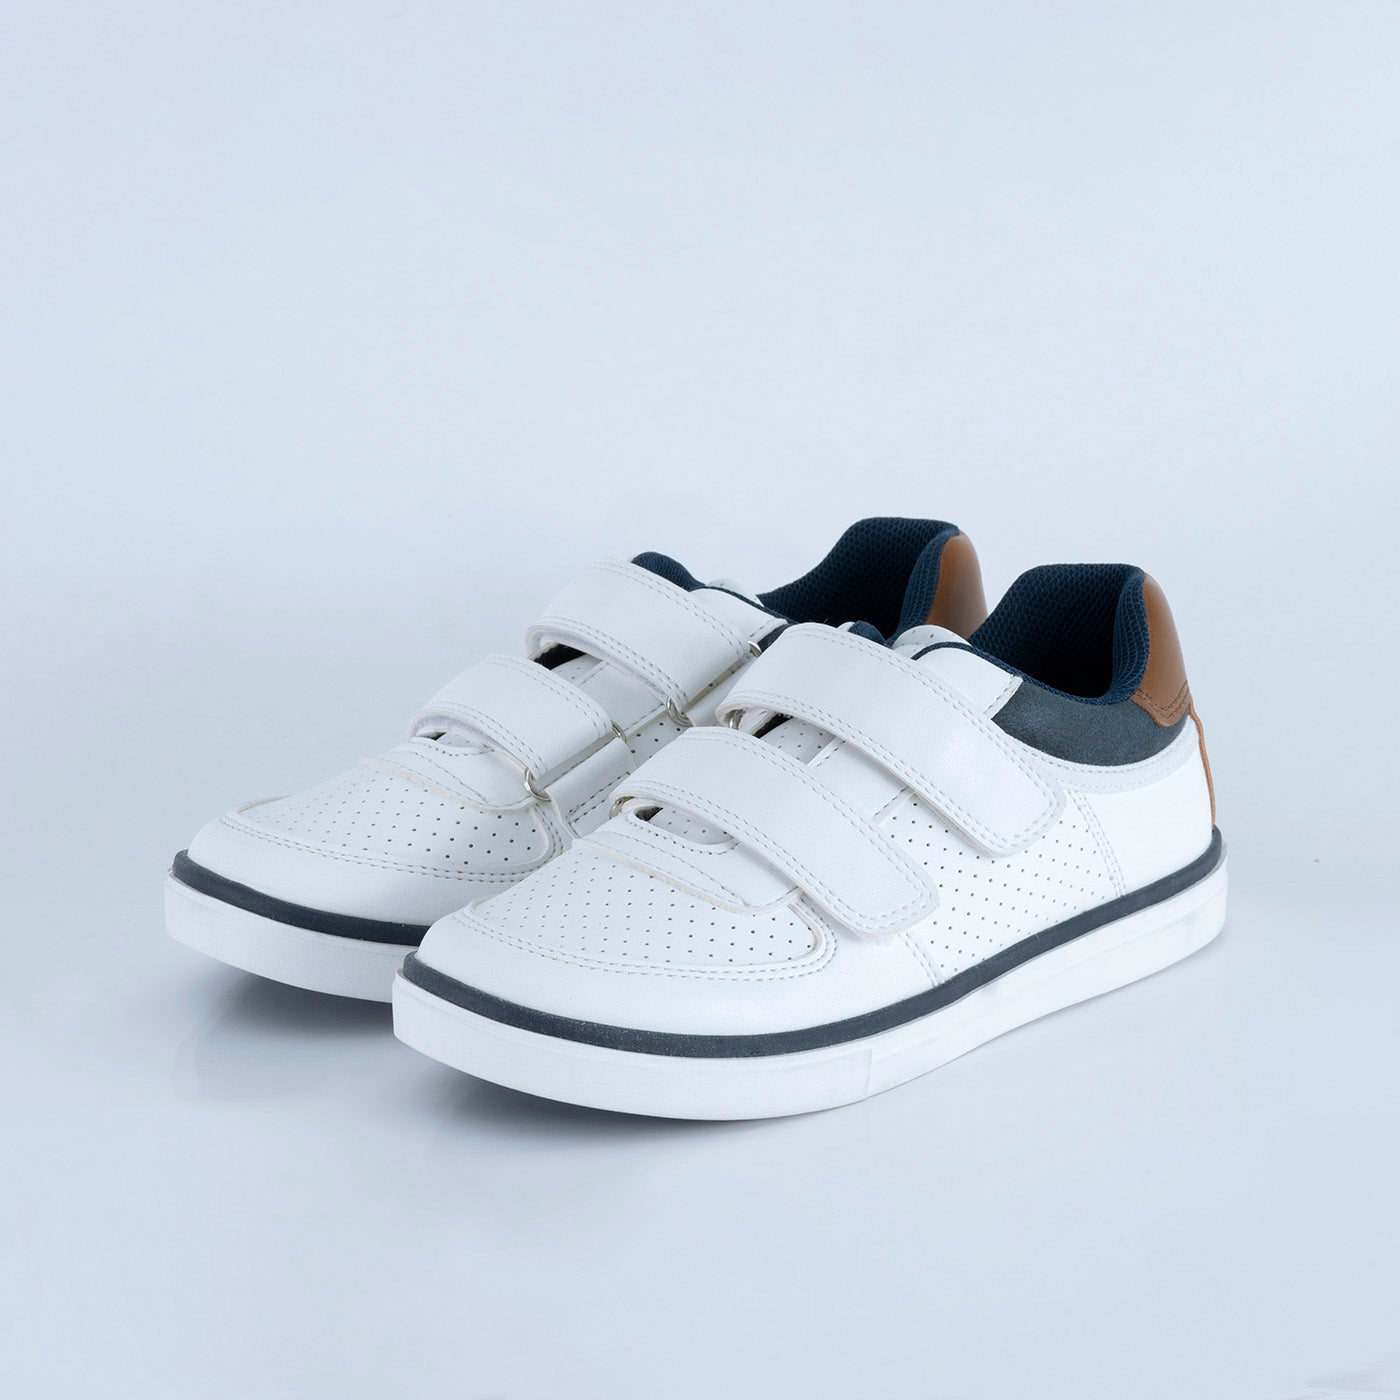 JKB BOYS William Casual Shoes